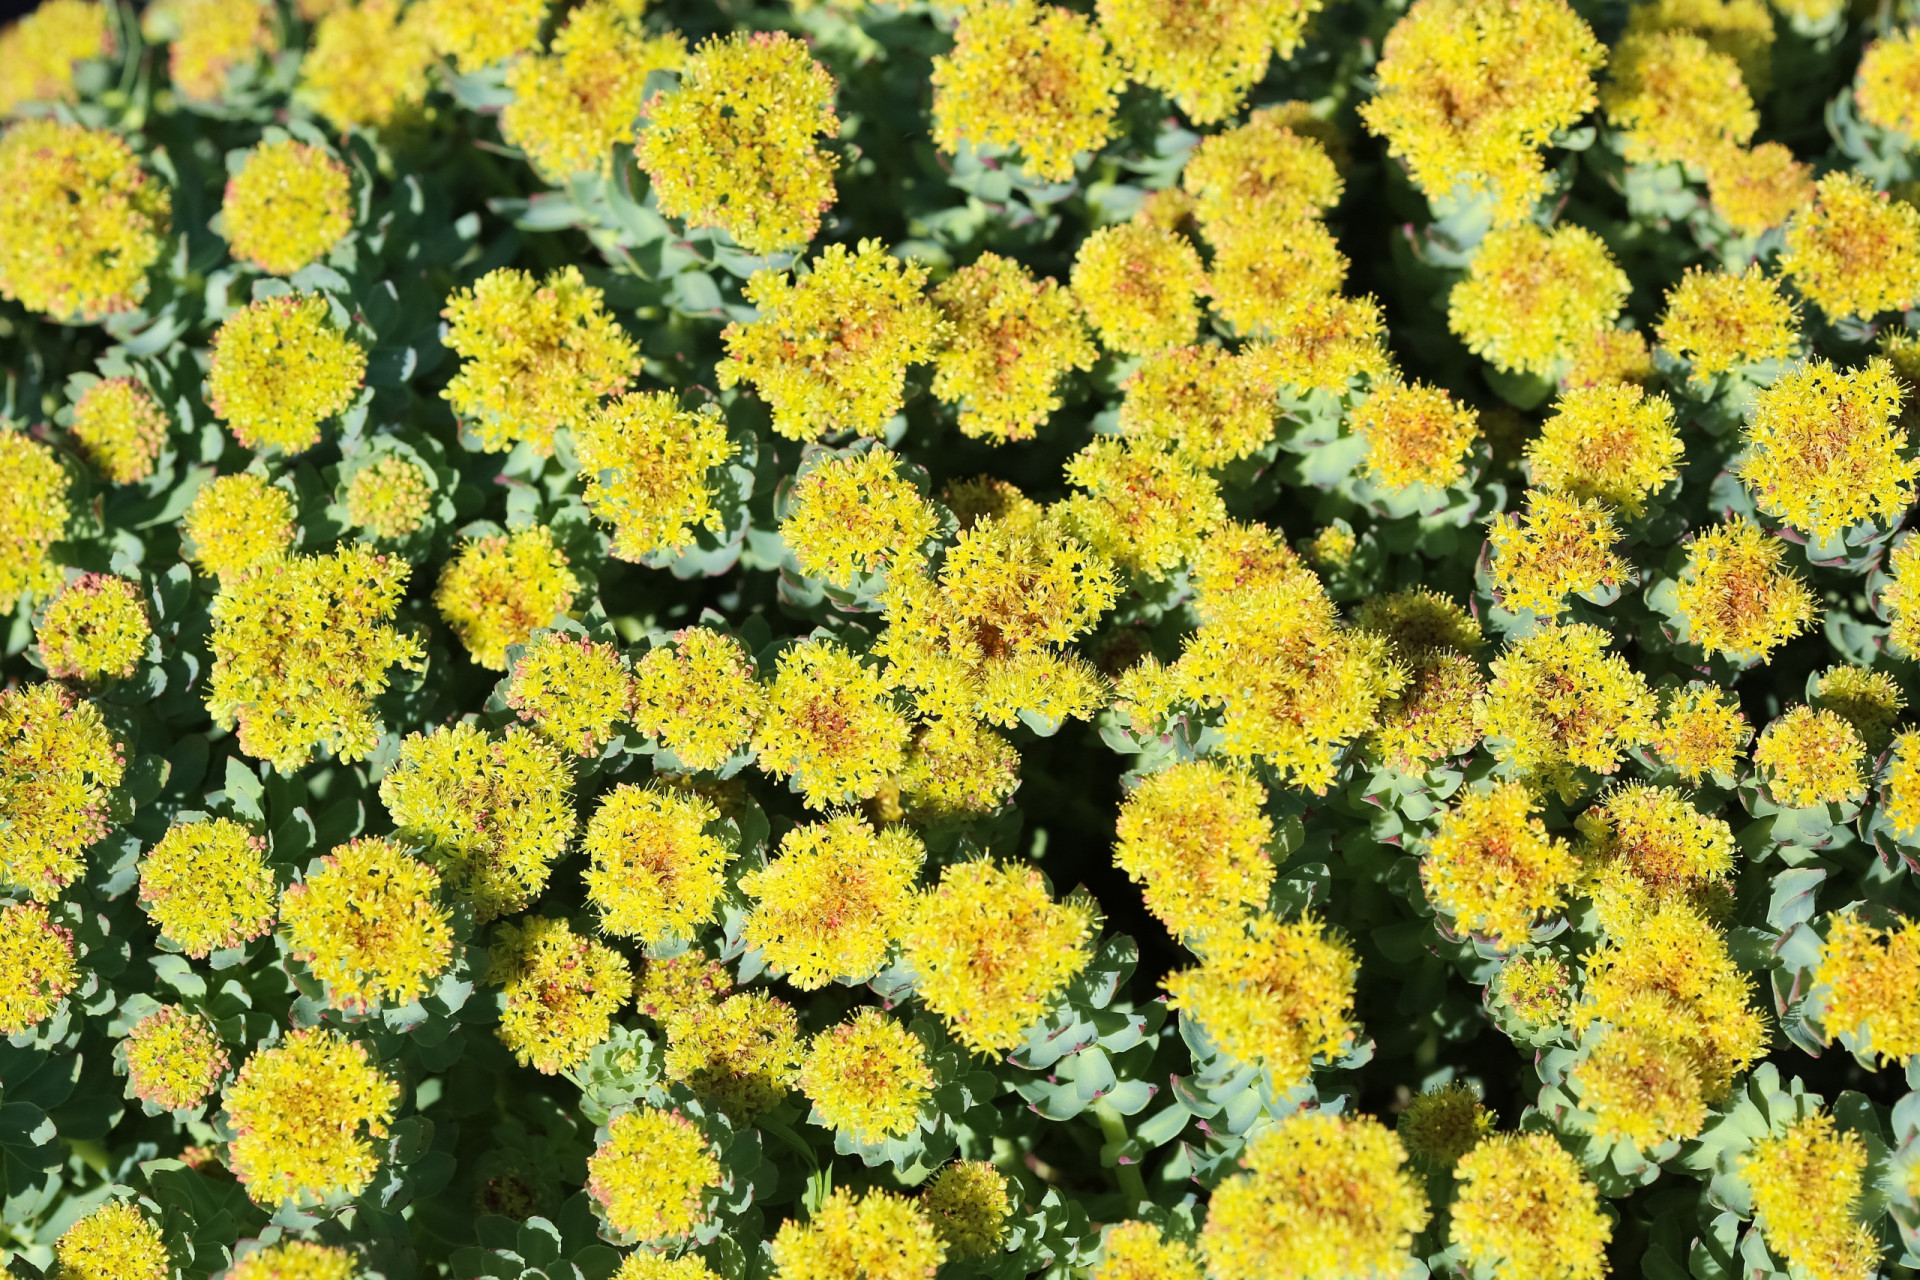 <p>Rhodiola (<em>rhodiola rosea</em>) may interact with SSRIs, affecting serotonin levels.</p><p><a href="https://www.msn.com/en-us/community/channel/vid-7xx8mnucu55yw63we9va2gwr7uihbxwc68fxqp25x6tg4ftibpra?cvid=94631541bc0f4f89bfd59158d696ad7e">Follow us and access great exclusive content every day</a></p>